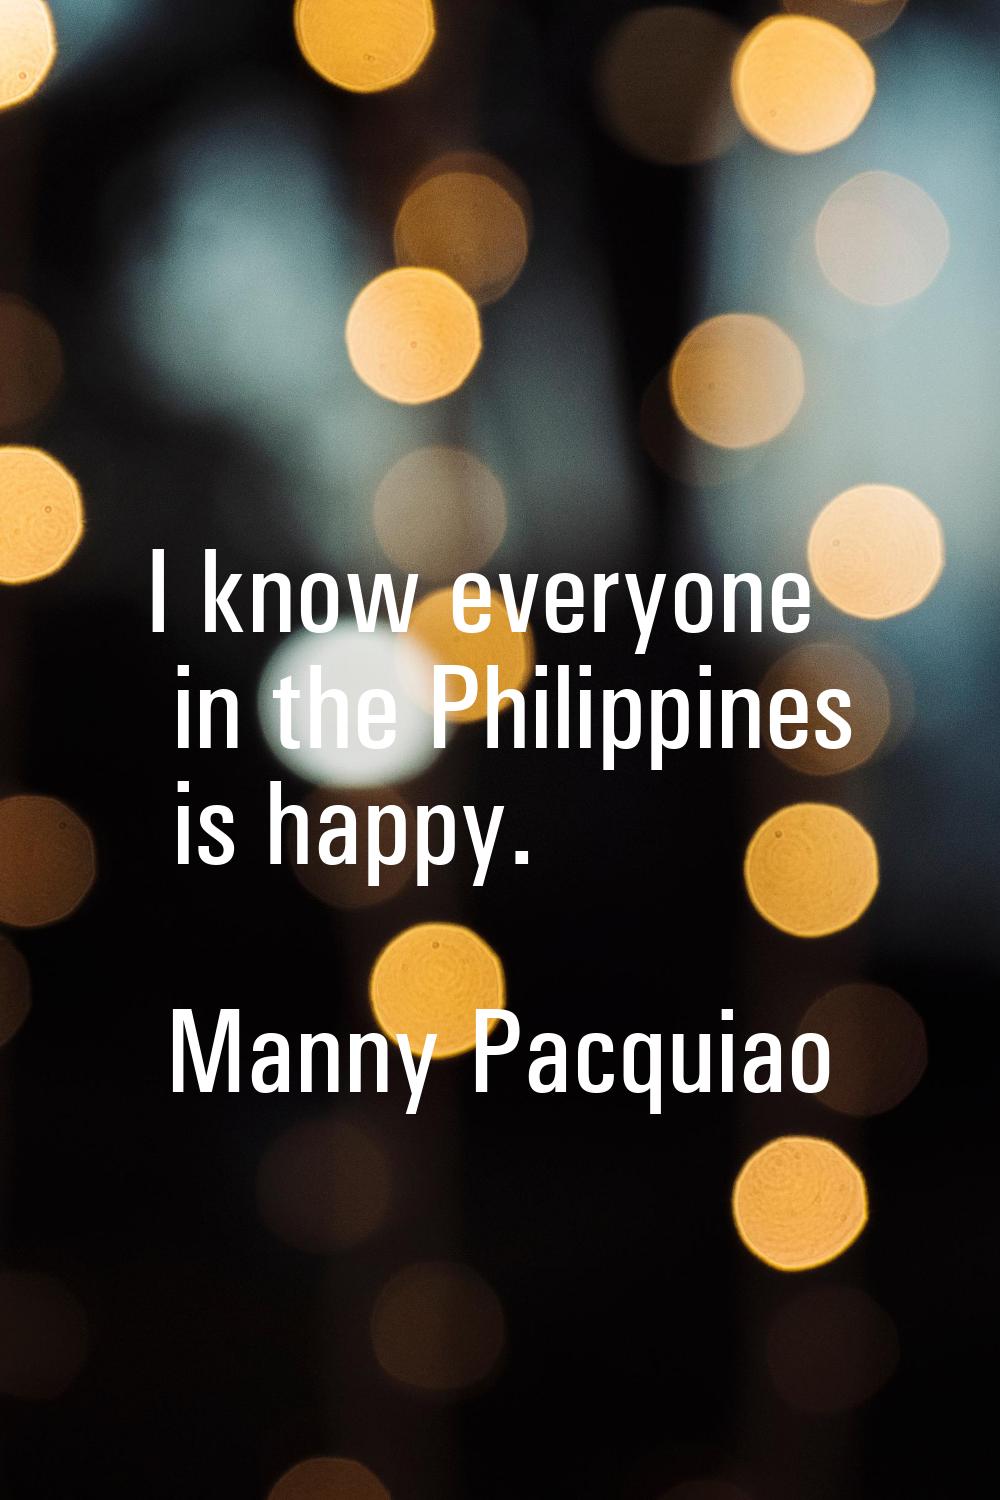 I know everyone in the Philippines is happy.